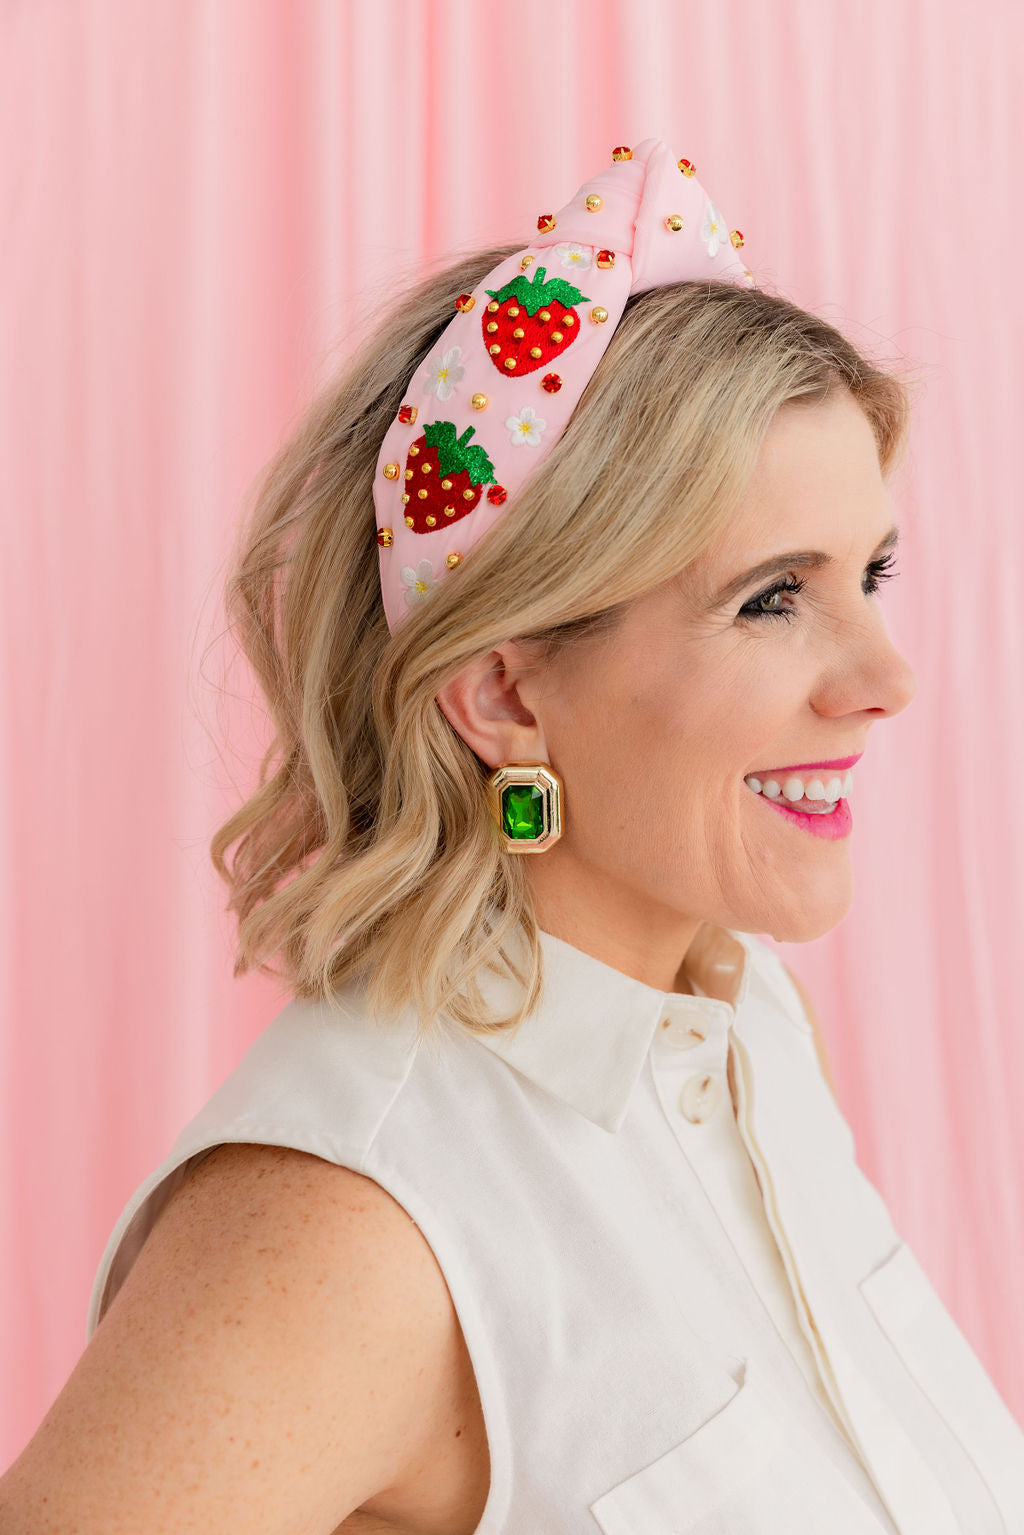 Adult Size Embroidered Strawberry Headband with Crystals & Beads